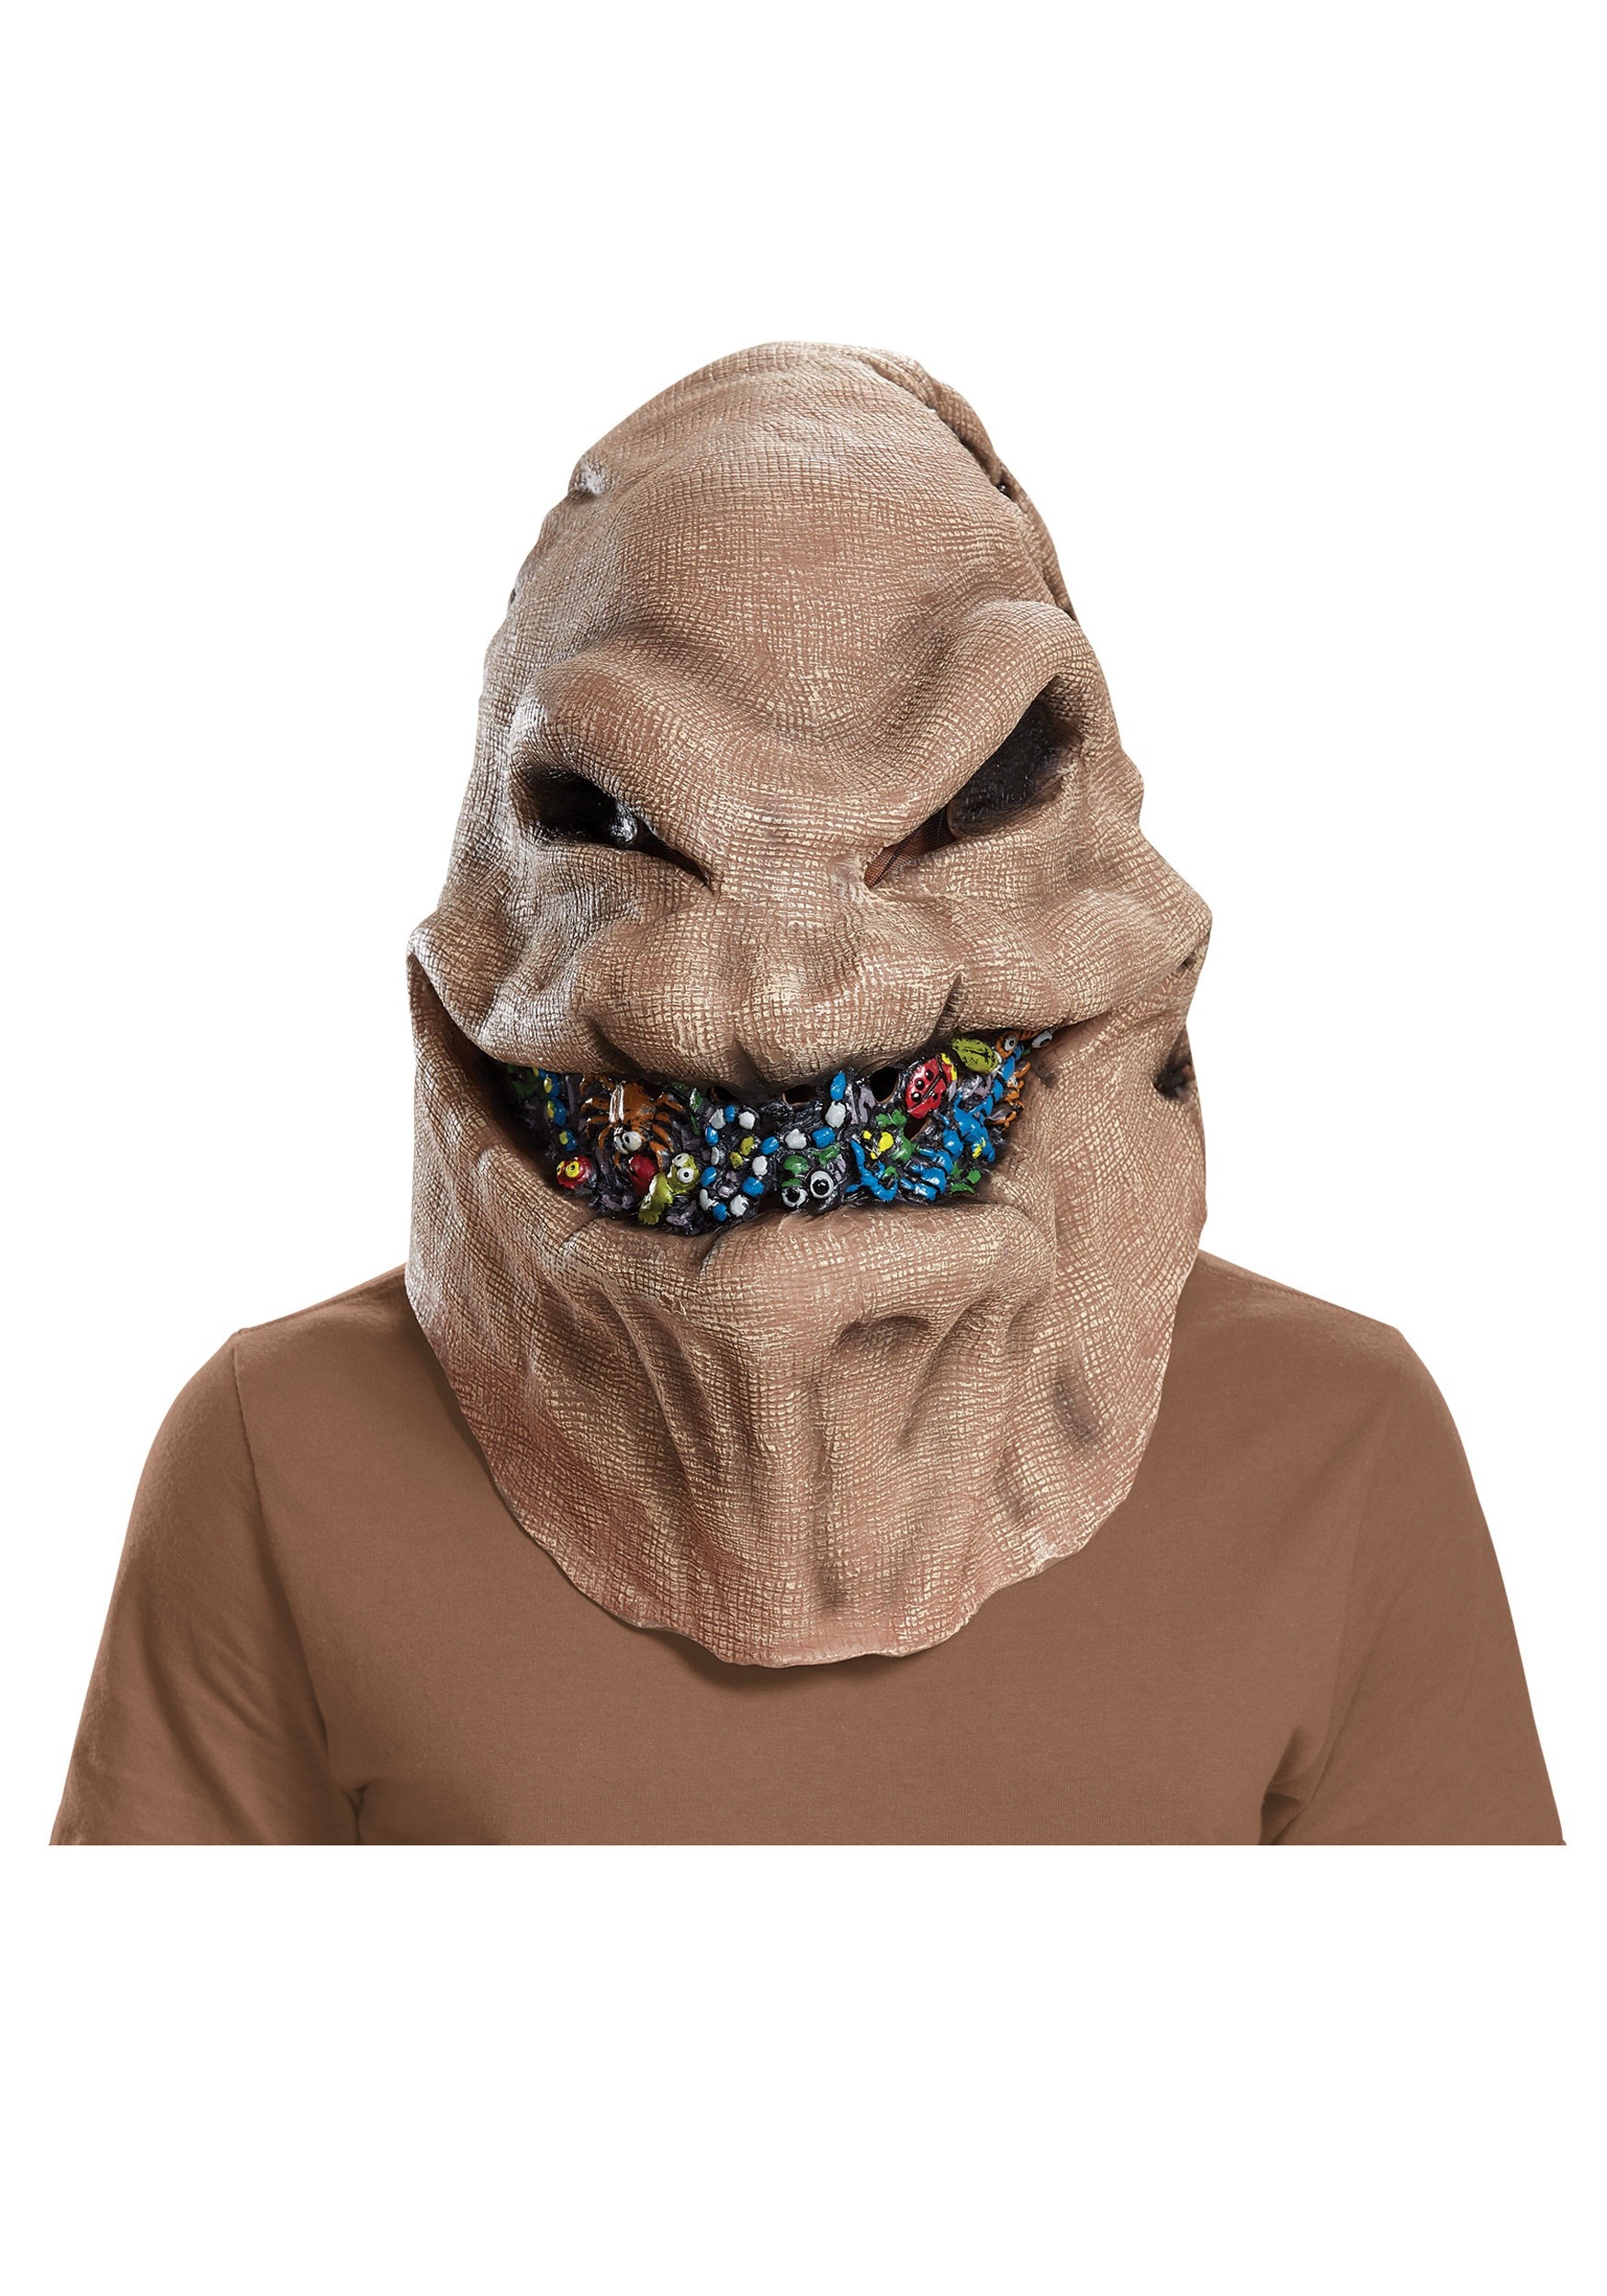 Image of Oogie Boogie Adult Vinyl Mask ID DI65446-ST